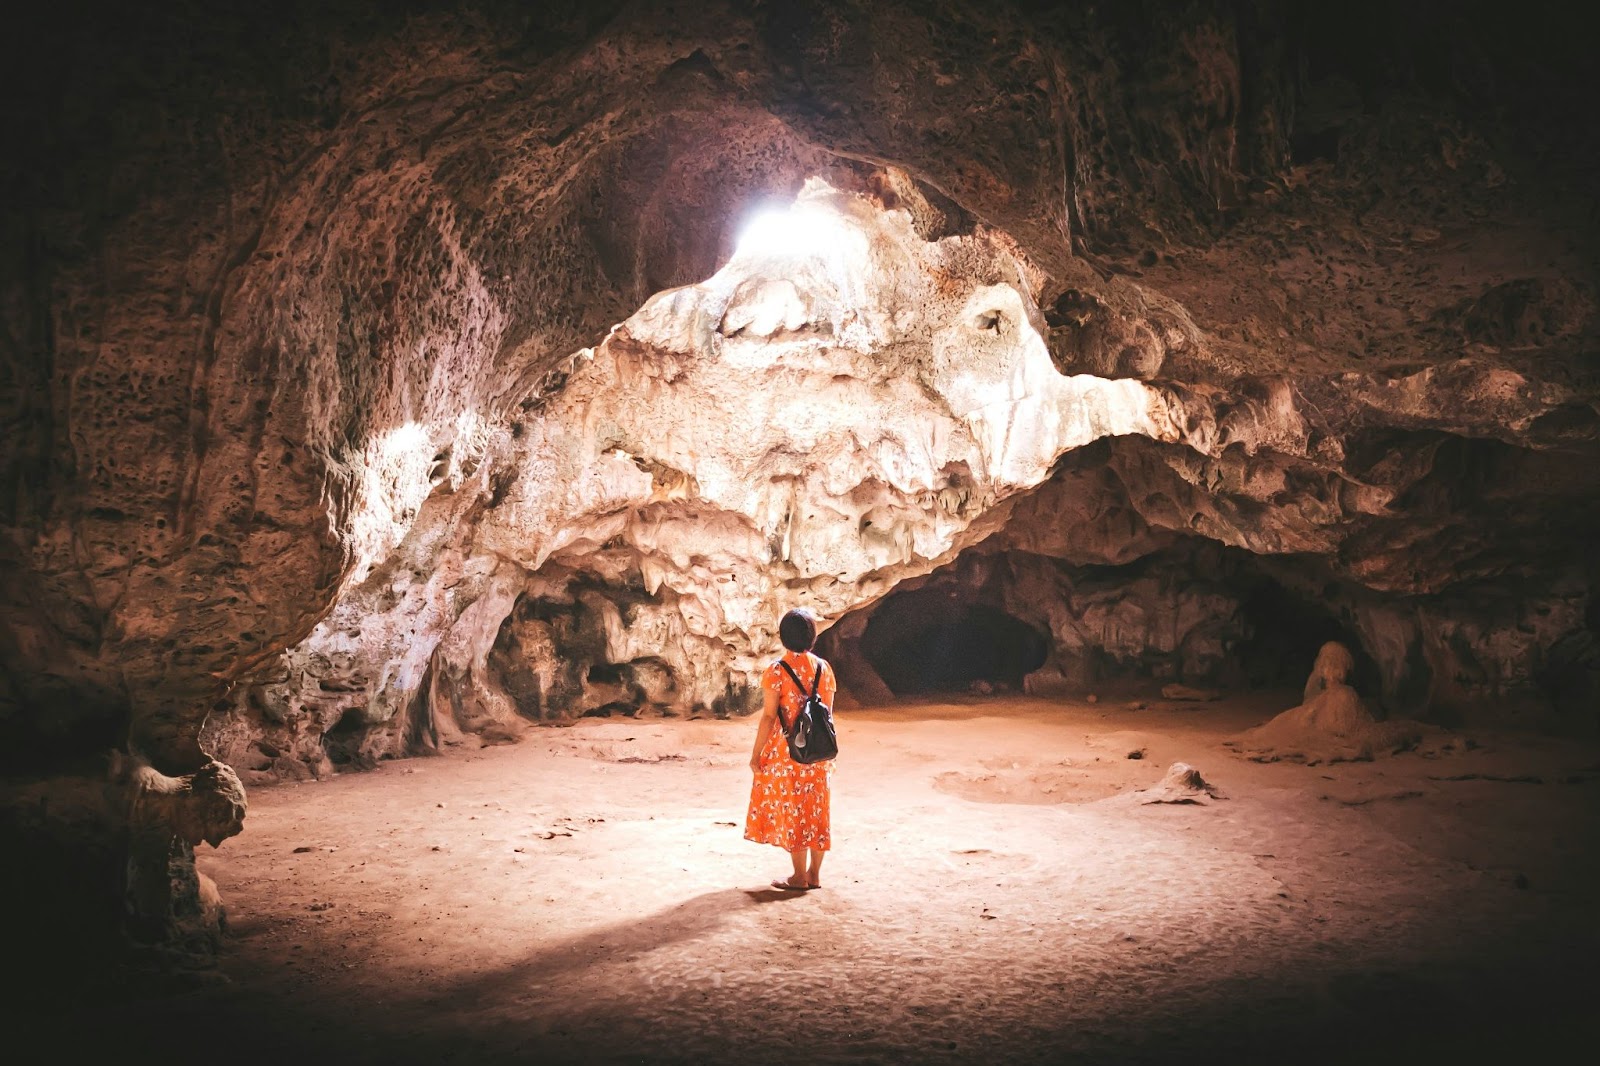 A visitor exploring the cave.